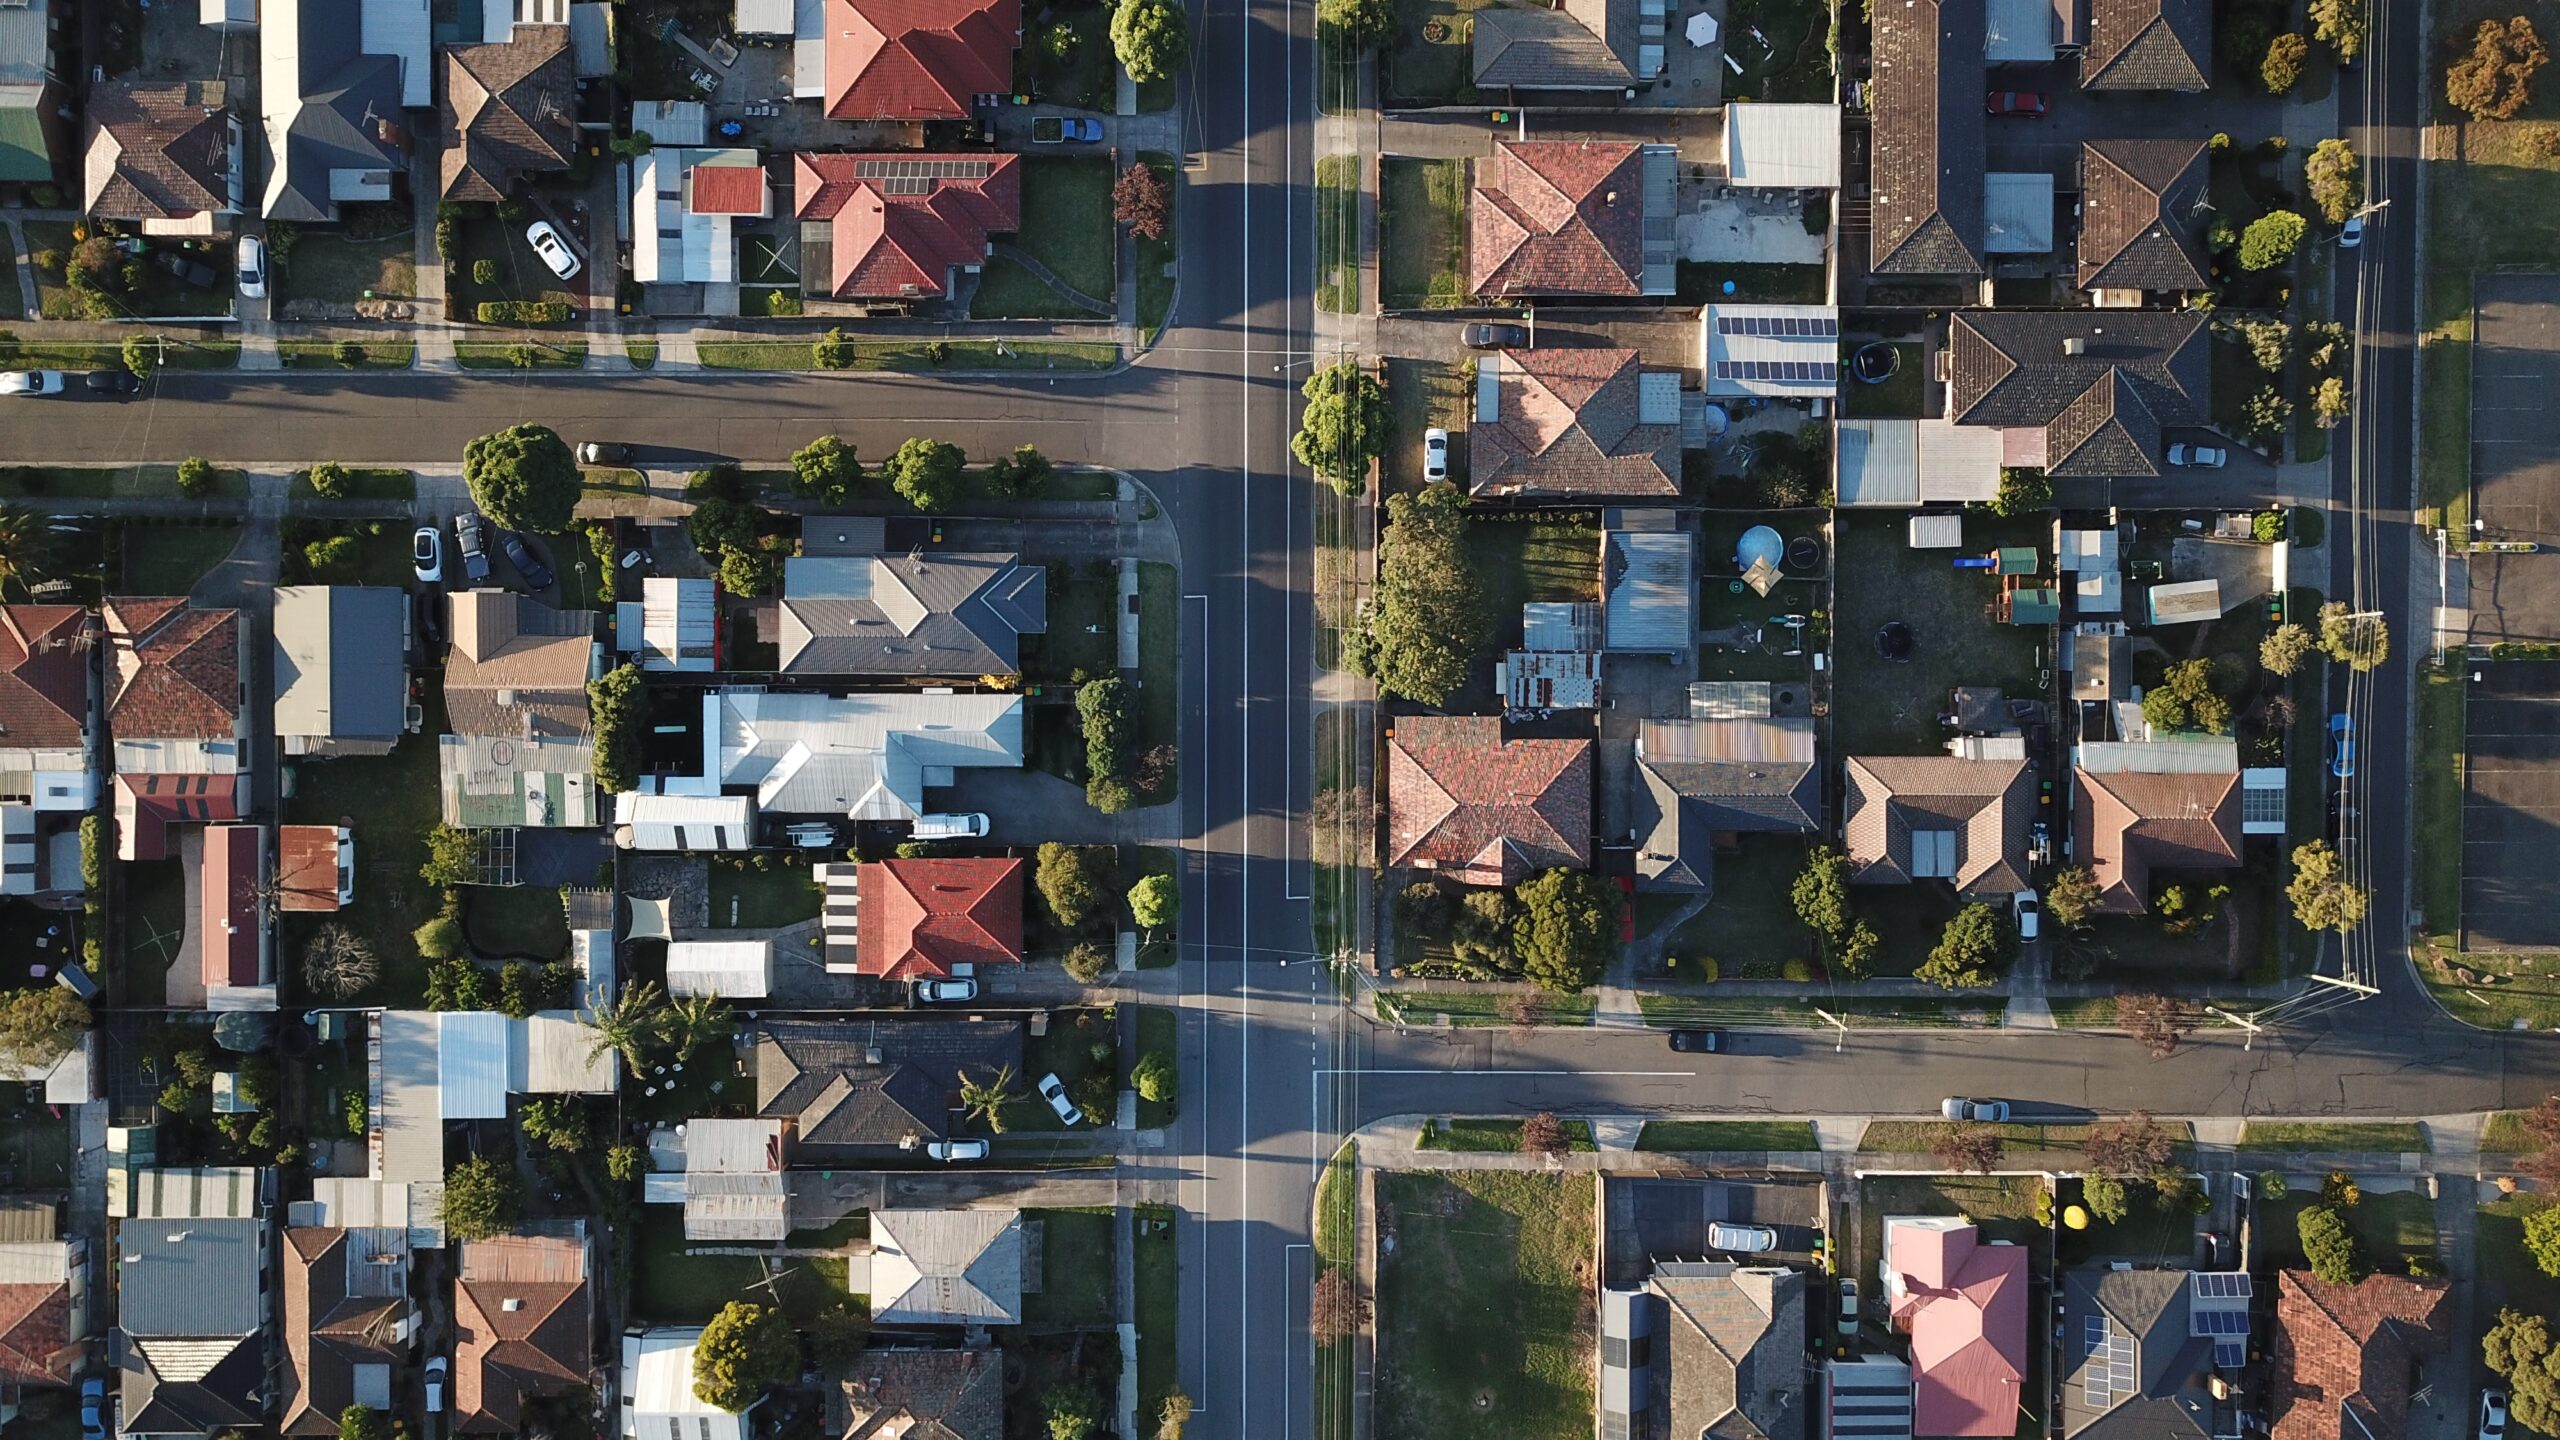 Aerial view of streets and homes in a residential neighborhood